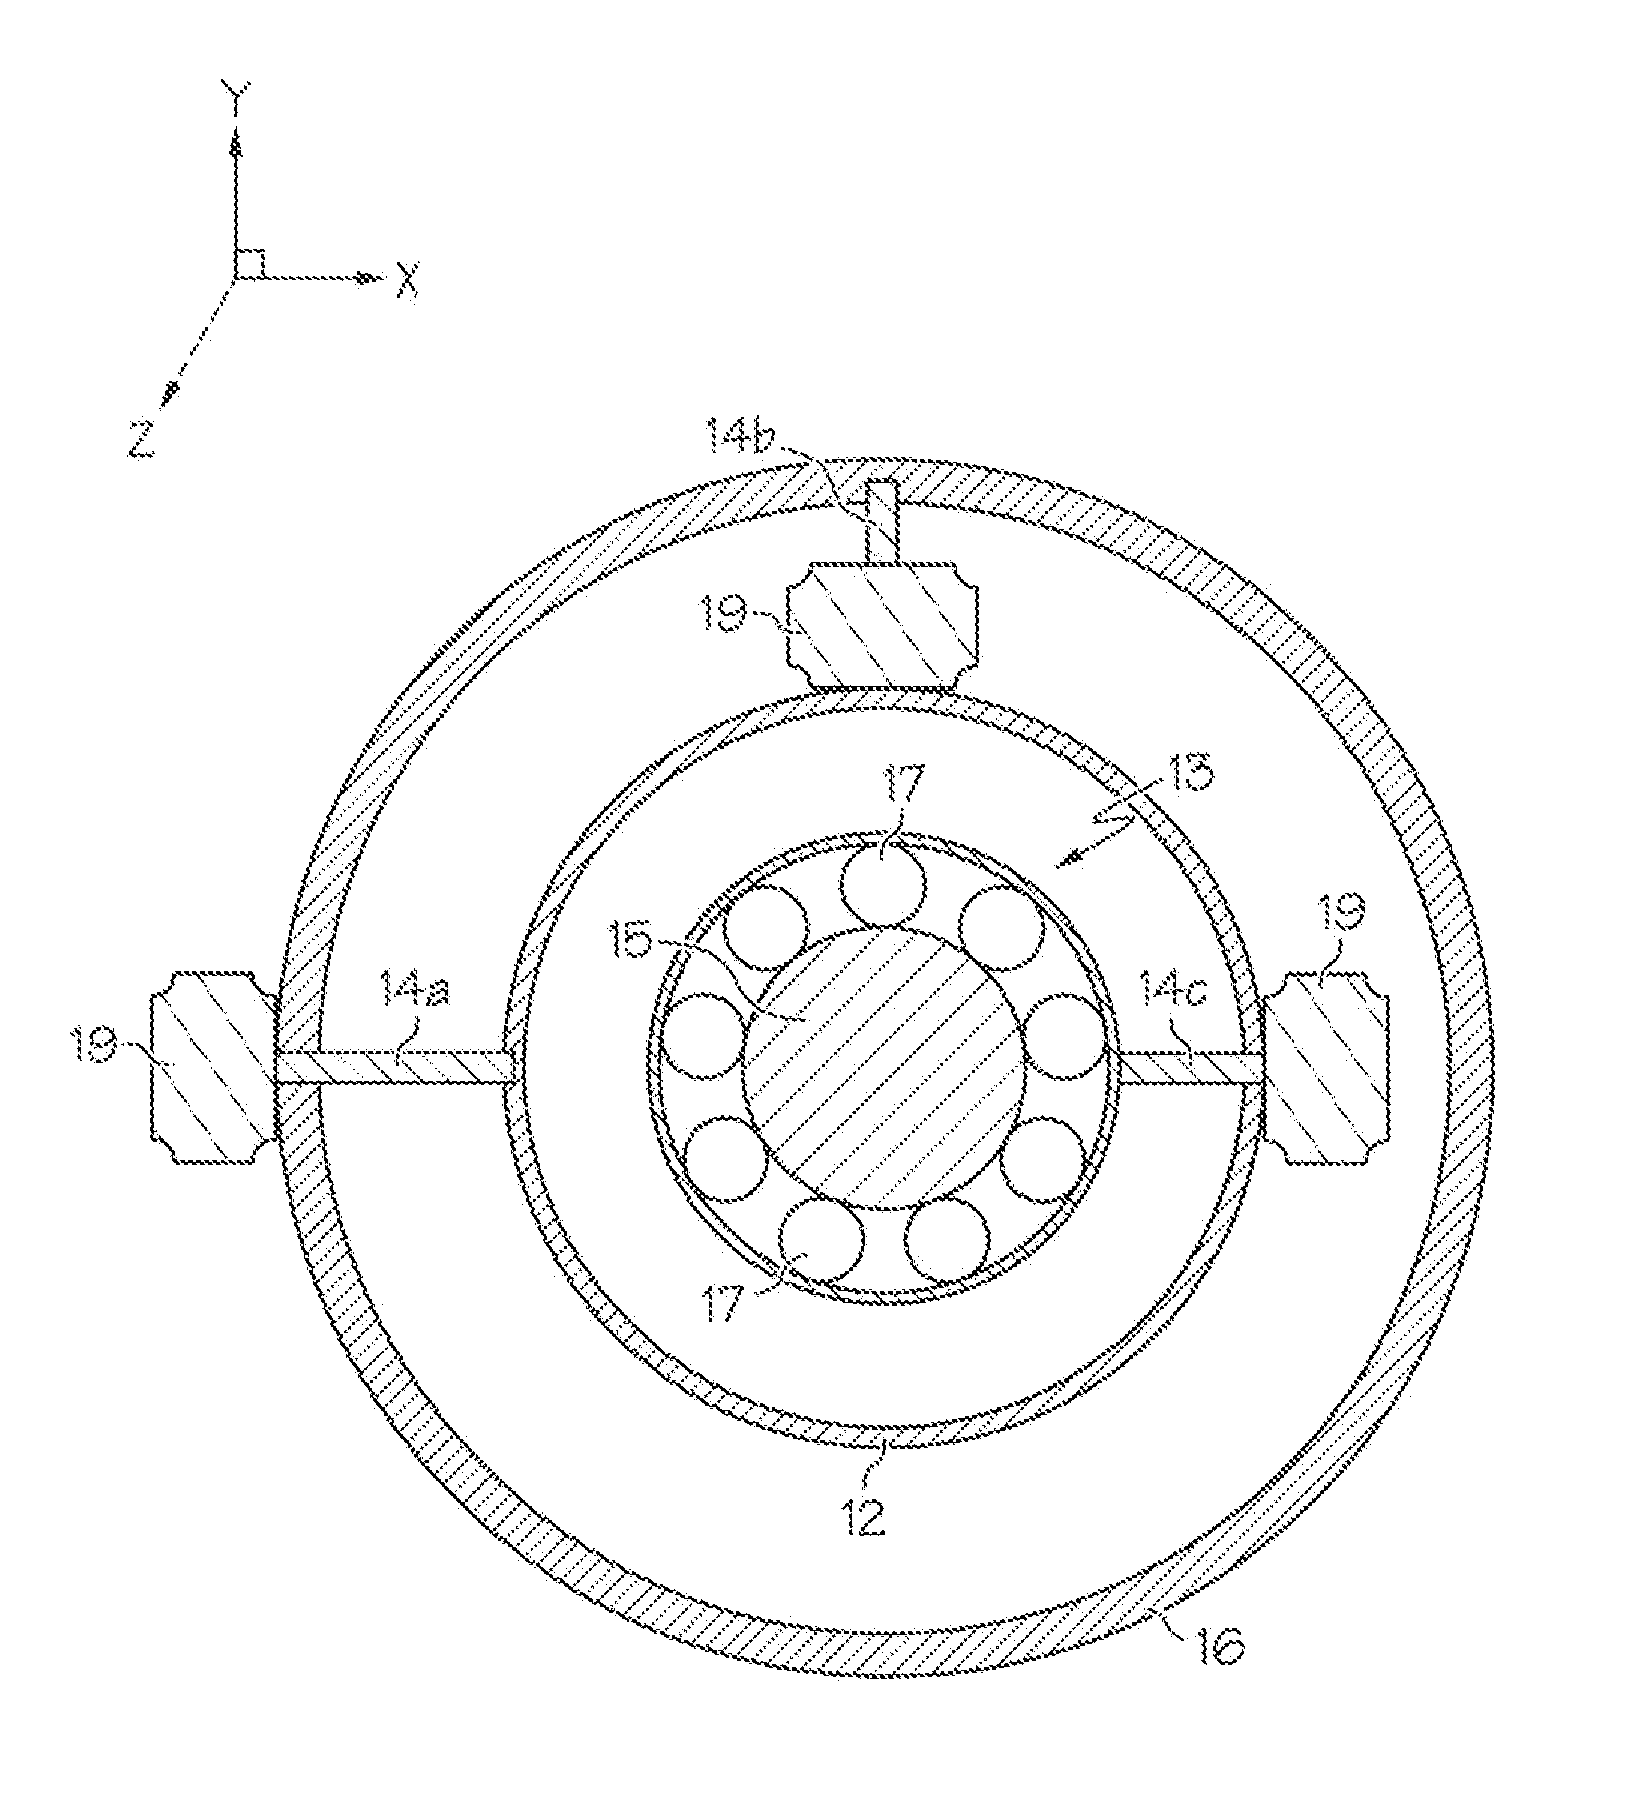 Three parameter damper anisotropic vibration isolation mounting assembly